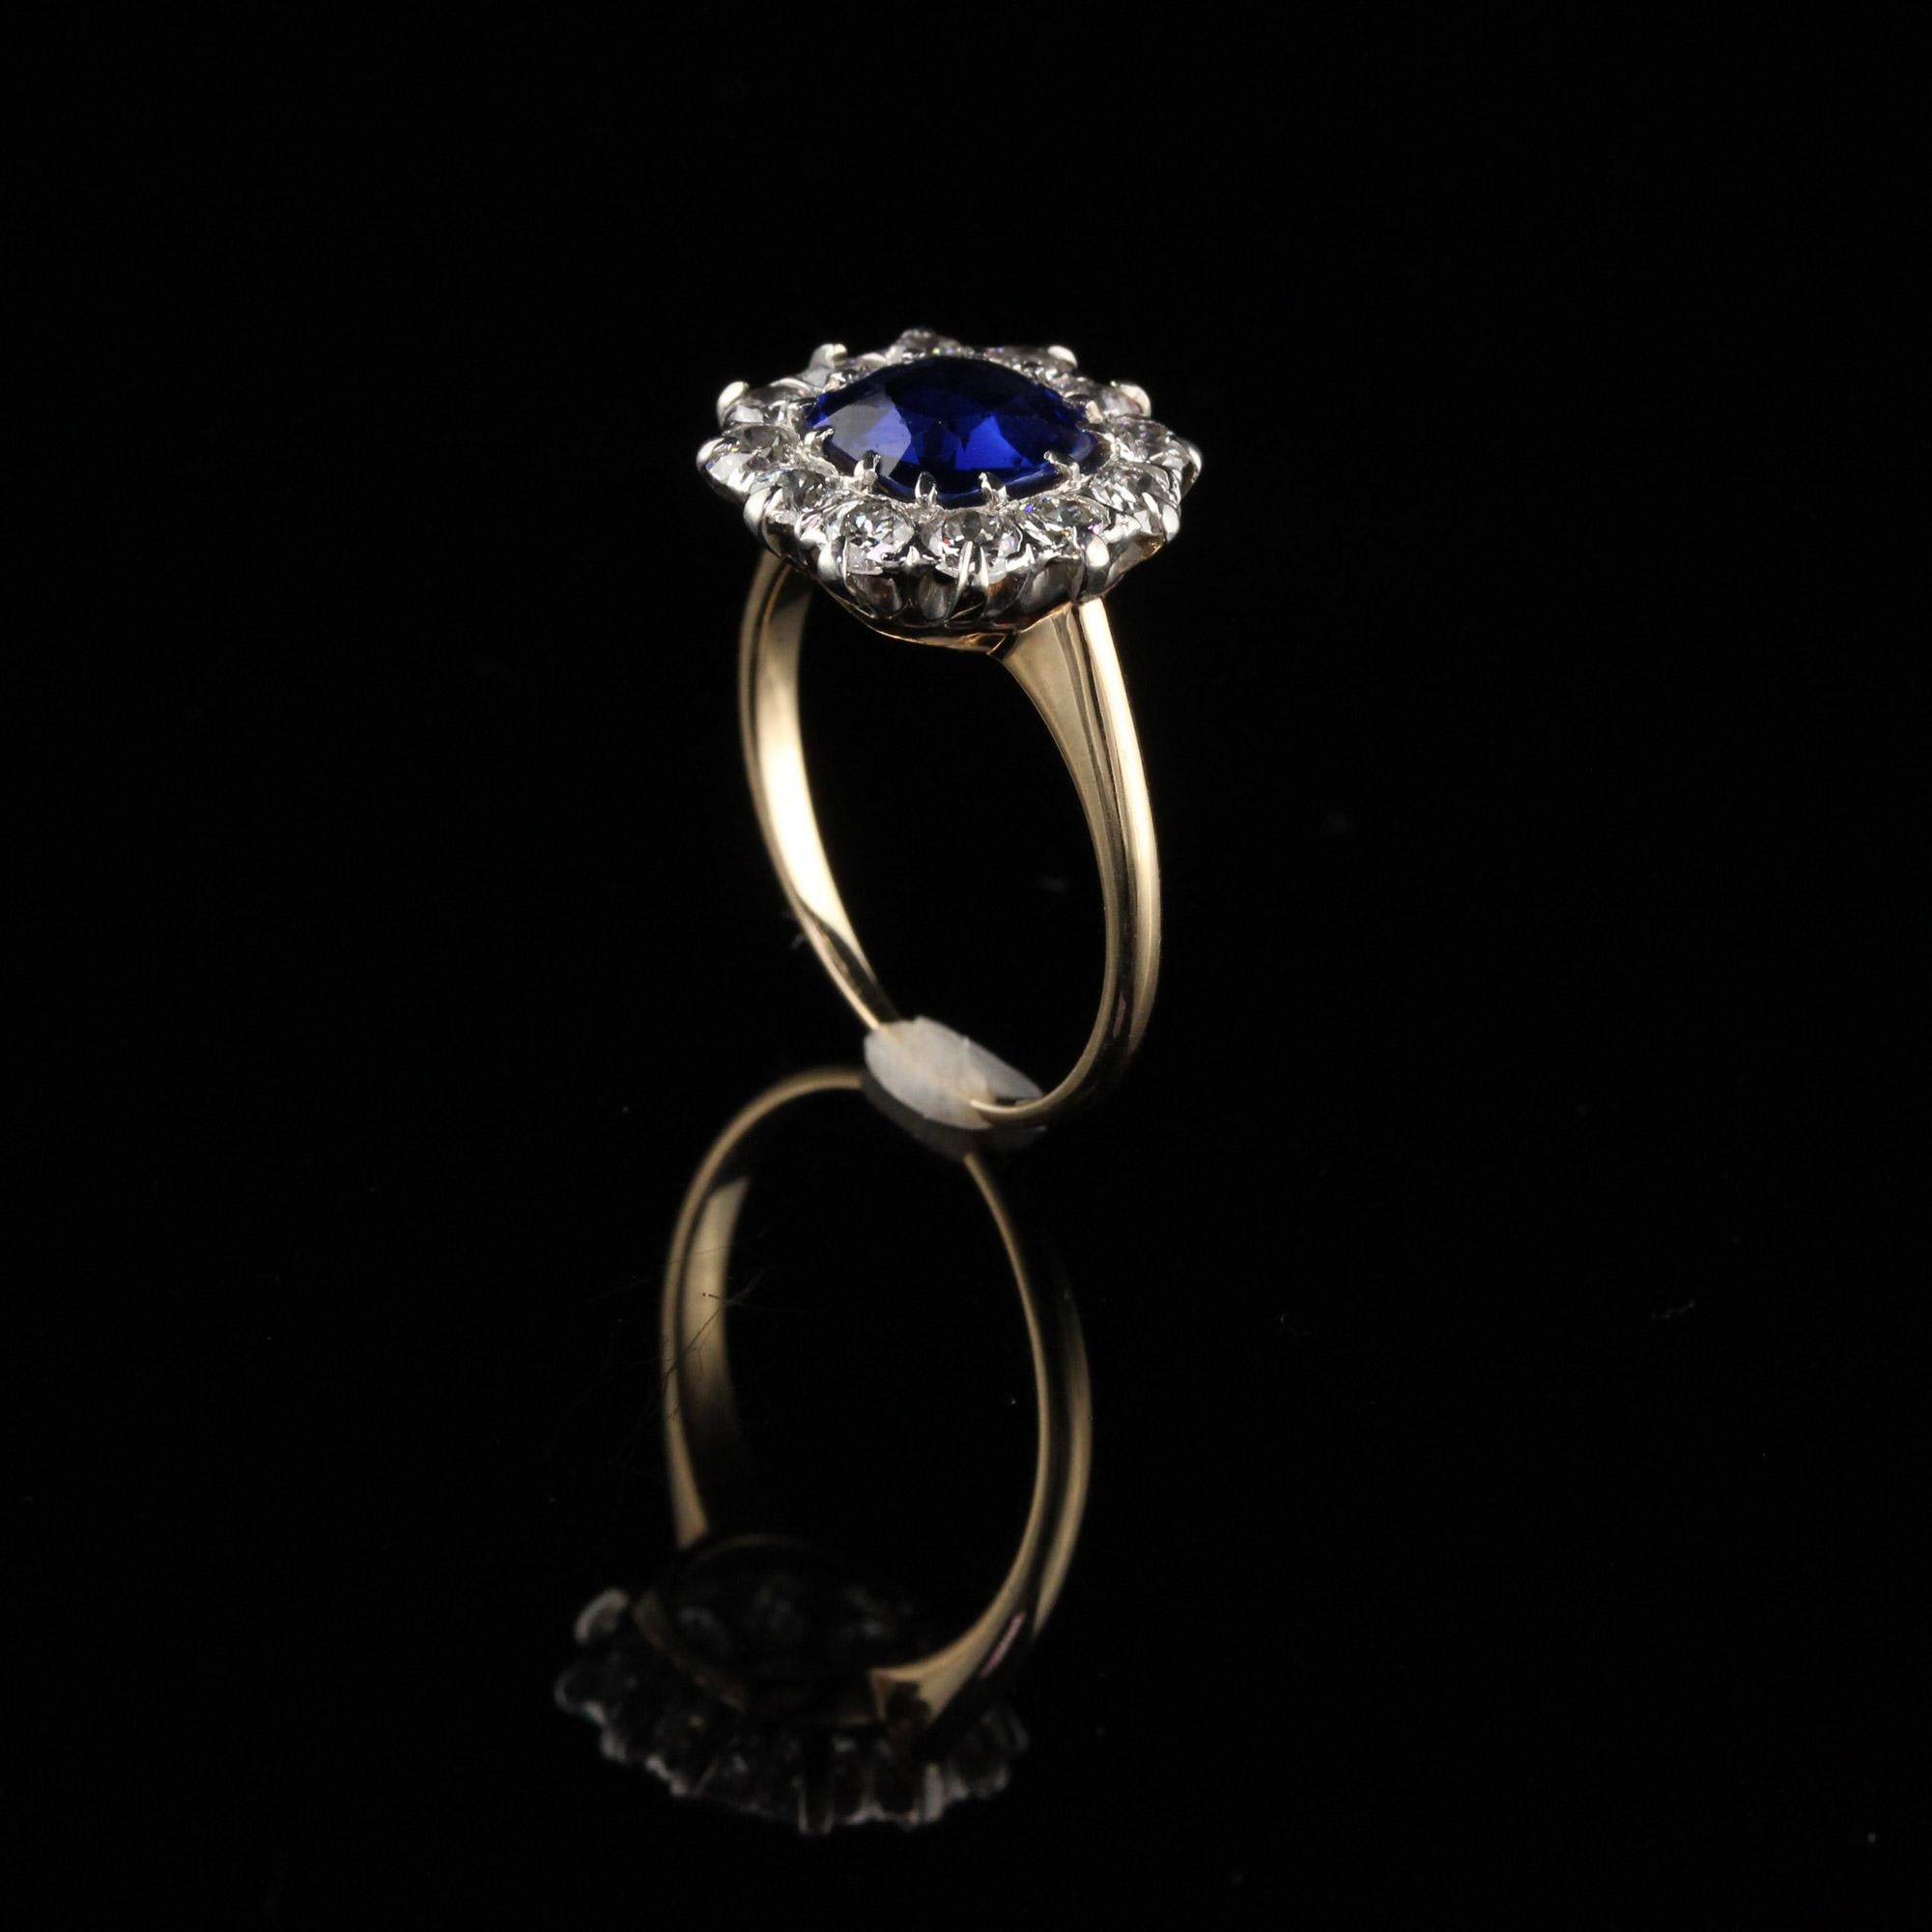 Antique Victorian 18K Yellow Gold Diamond and Sapphire Engagement Ring 1